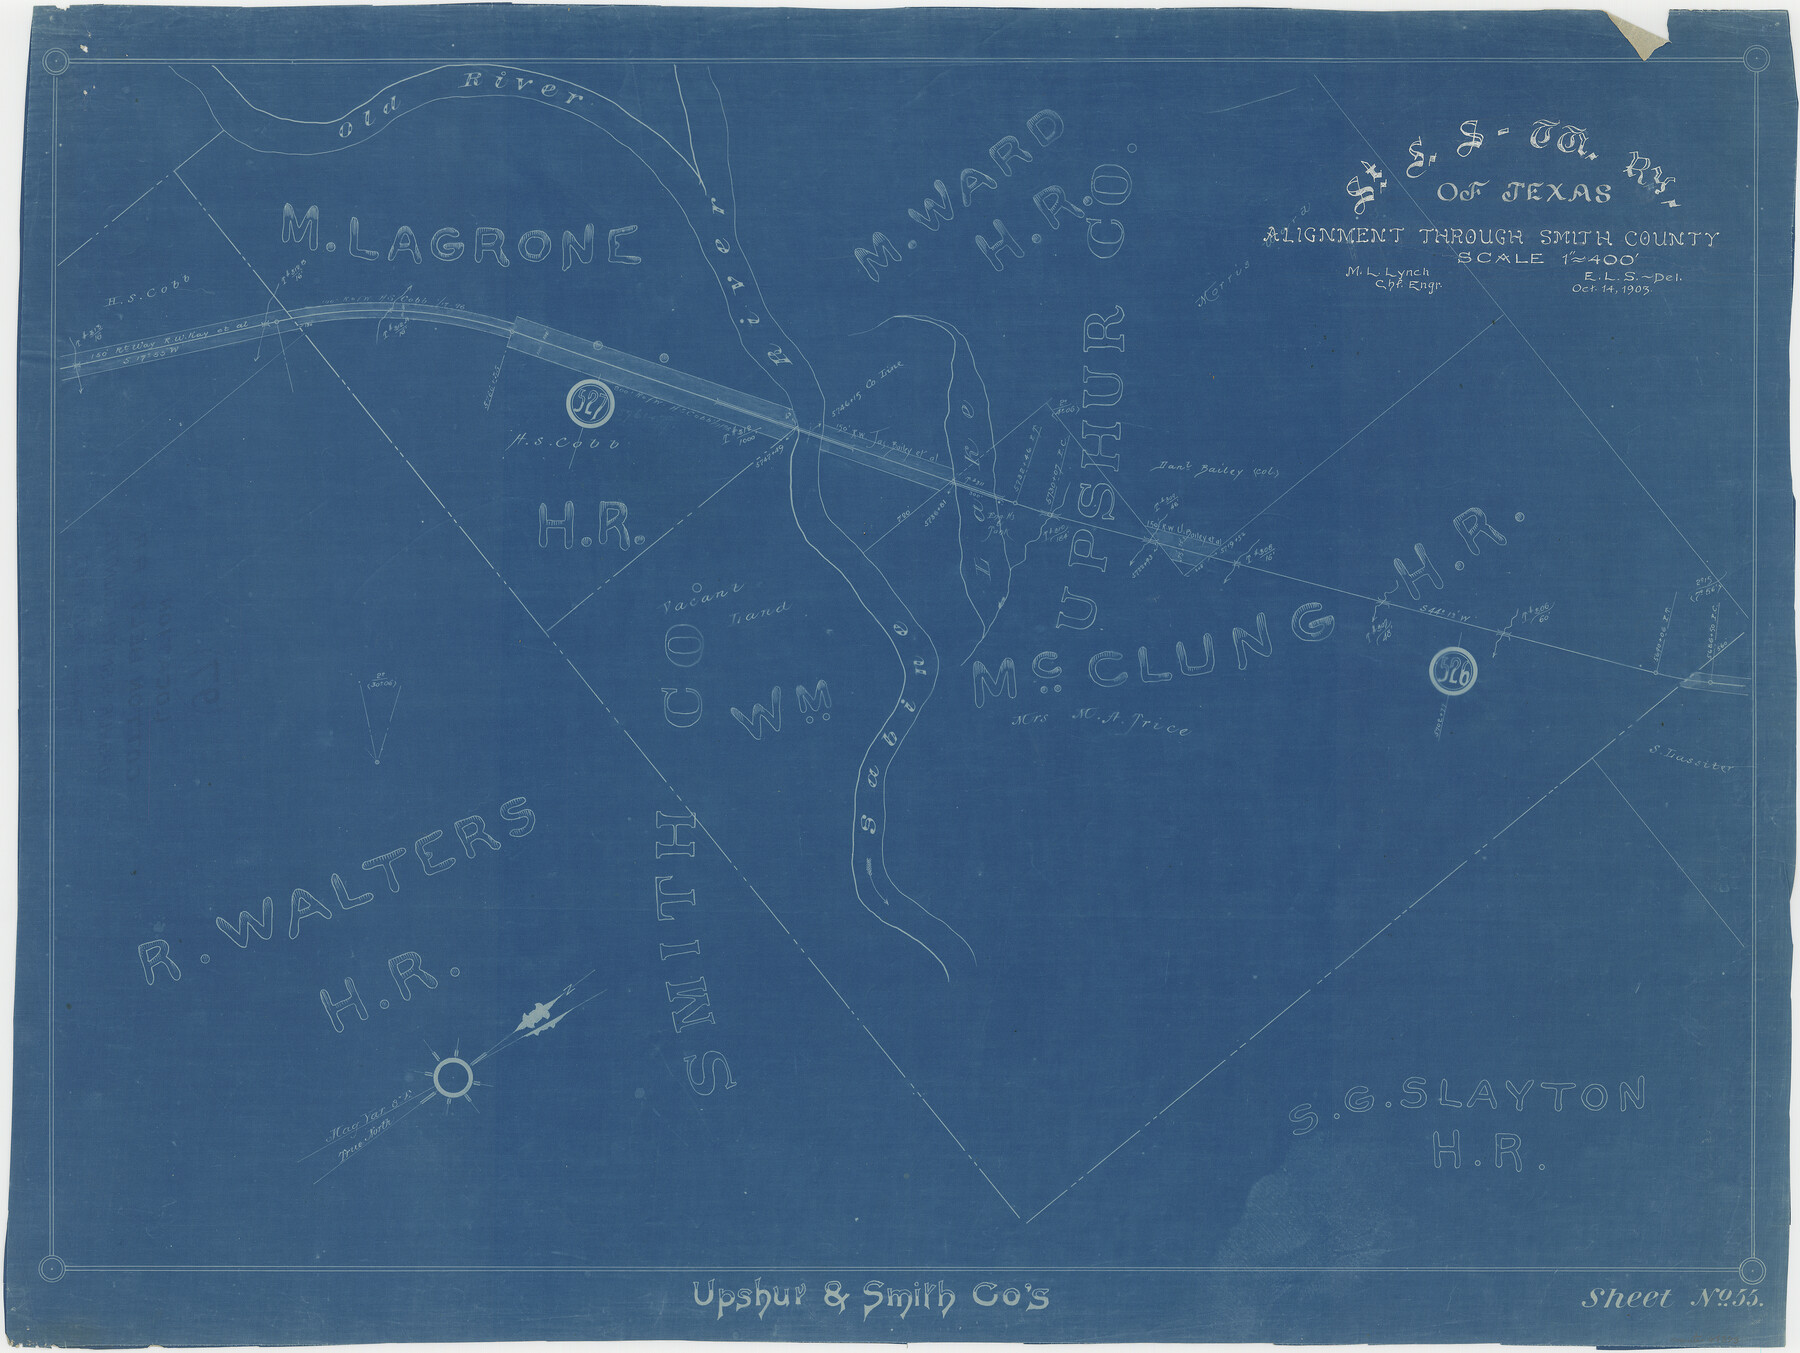 64373, [Cotton Belt] St. Louis Southwestern Railway of Texas, Alignment through Smith County, General Map Collection